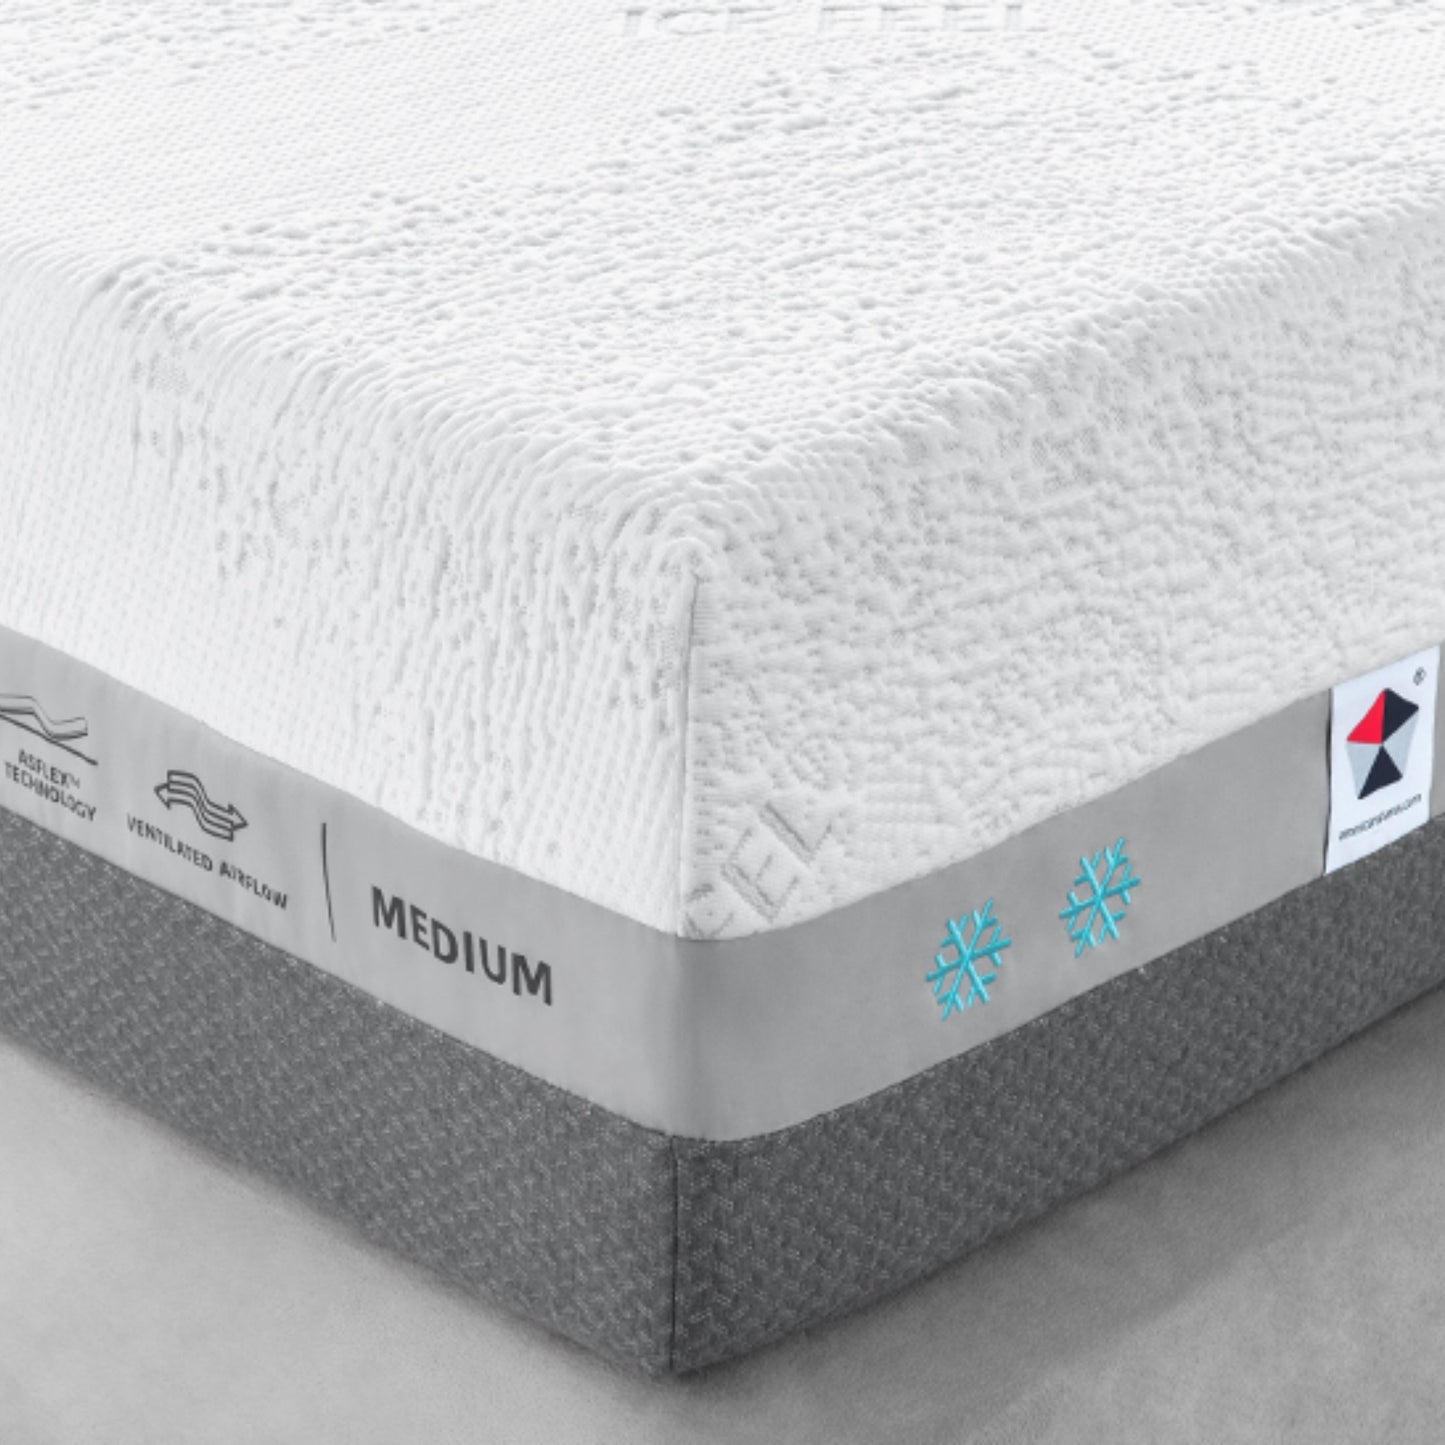 Primerest Ultra Queen Mattress, 12.5" Hybrid Max Gel Memory Foam with Ice Feel Cooling Knitted Fabric, Medium Plush Comfort and Individually Wrapped Pocketed Coils, Made in USA